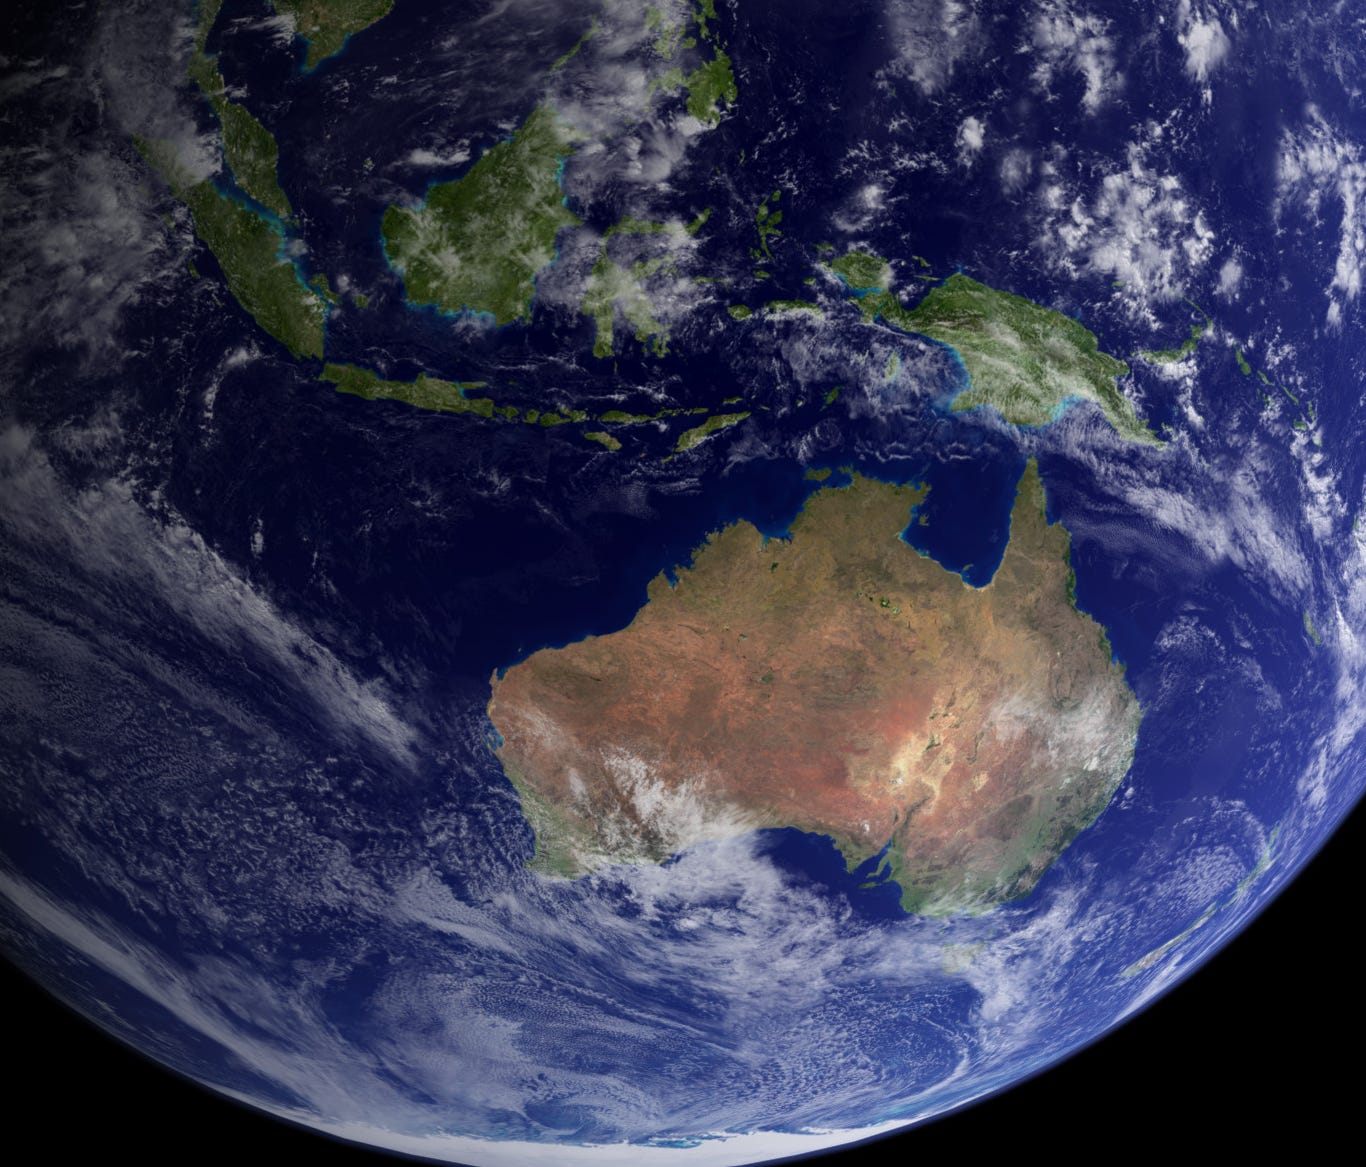 Researchers say that part of what's now Australia was part of present-day North America.